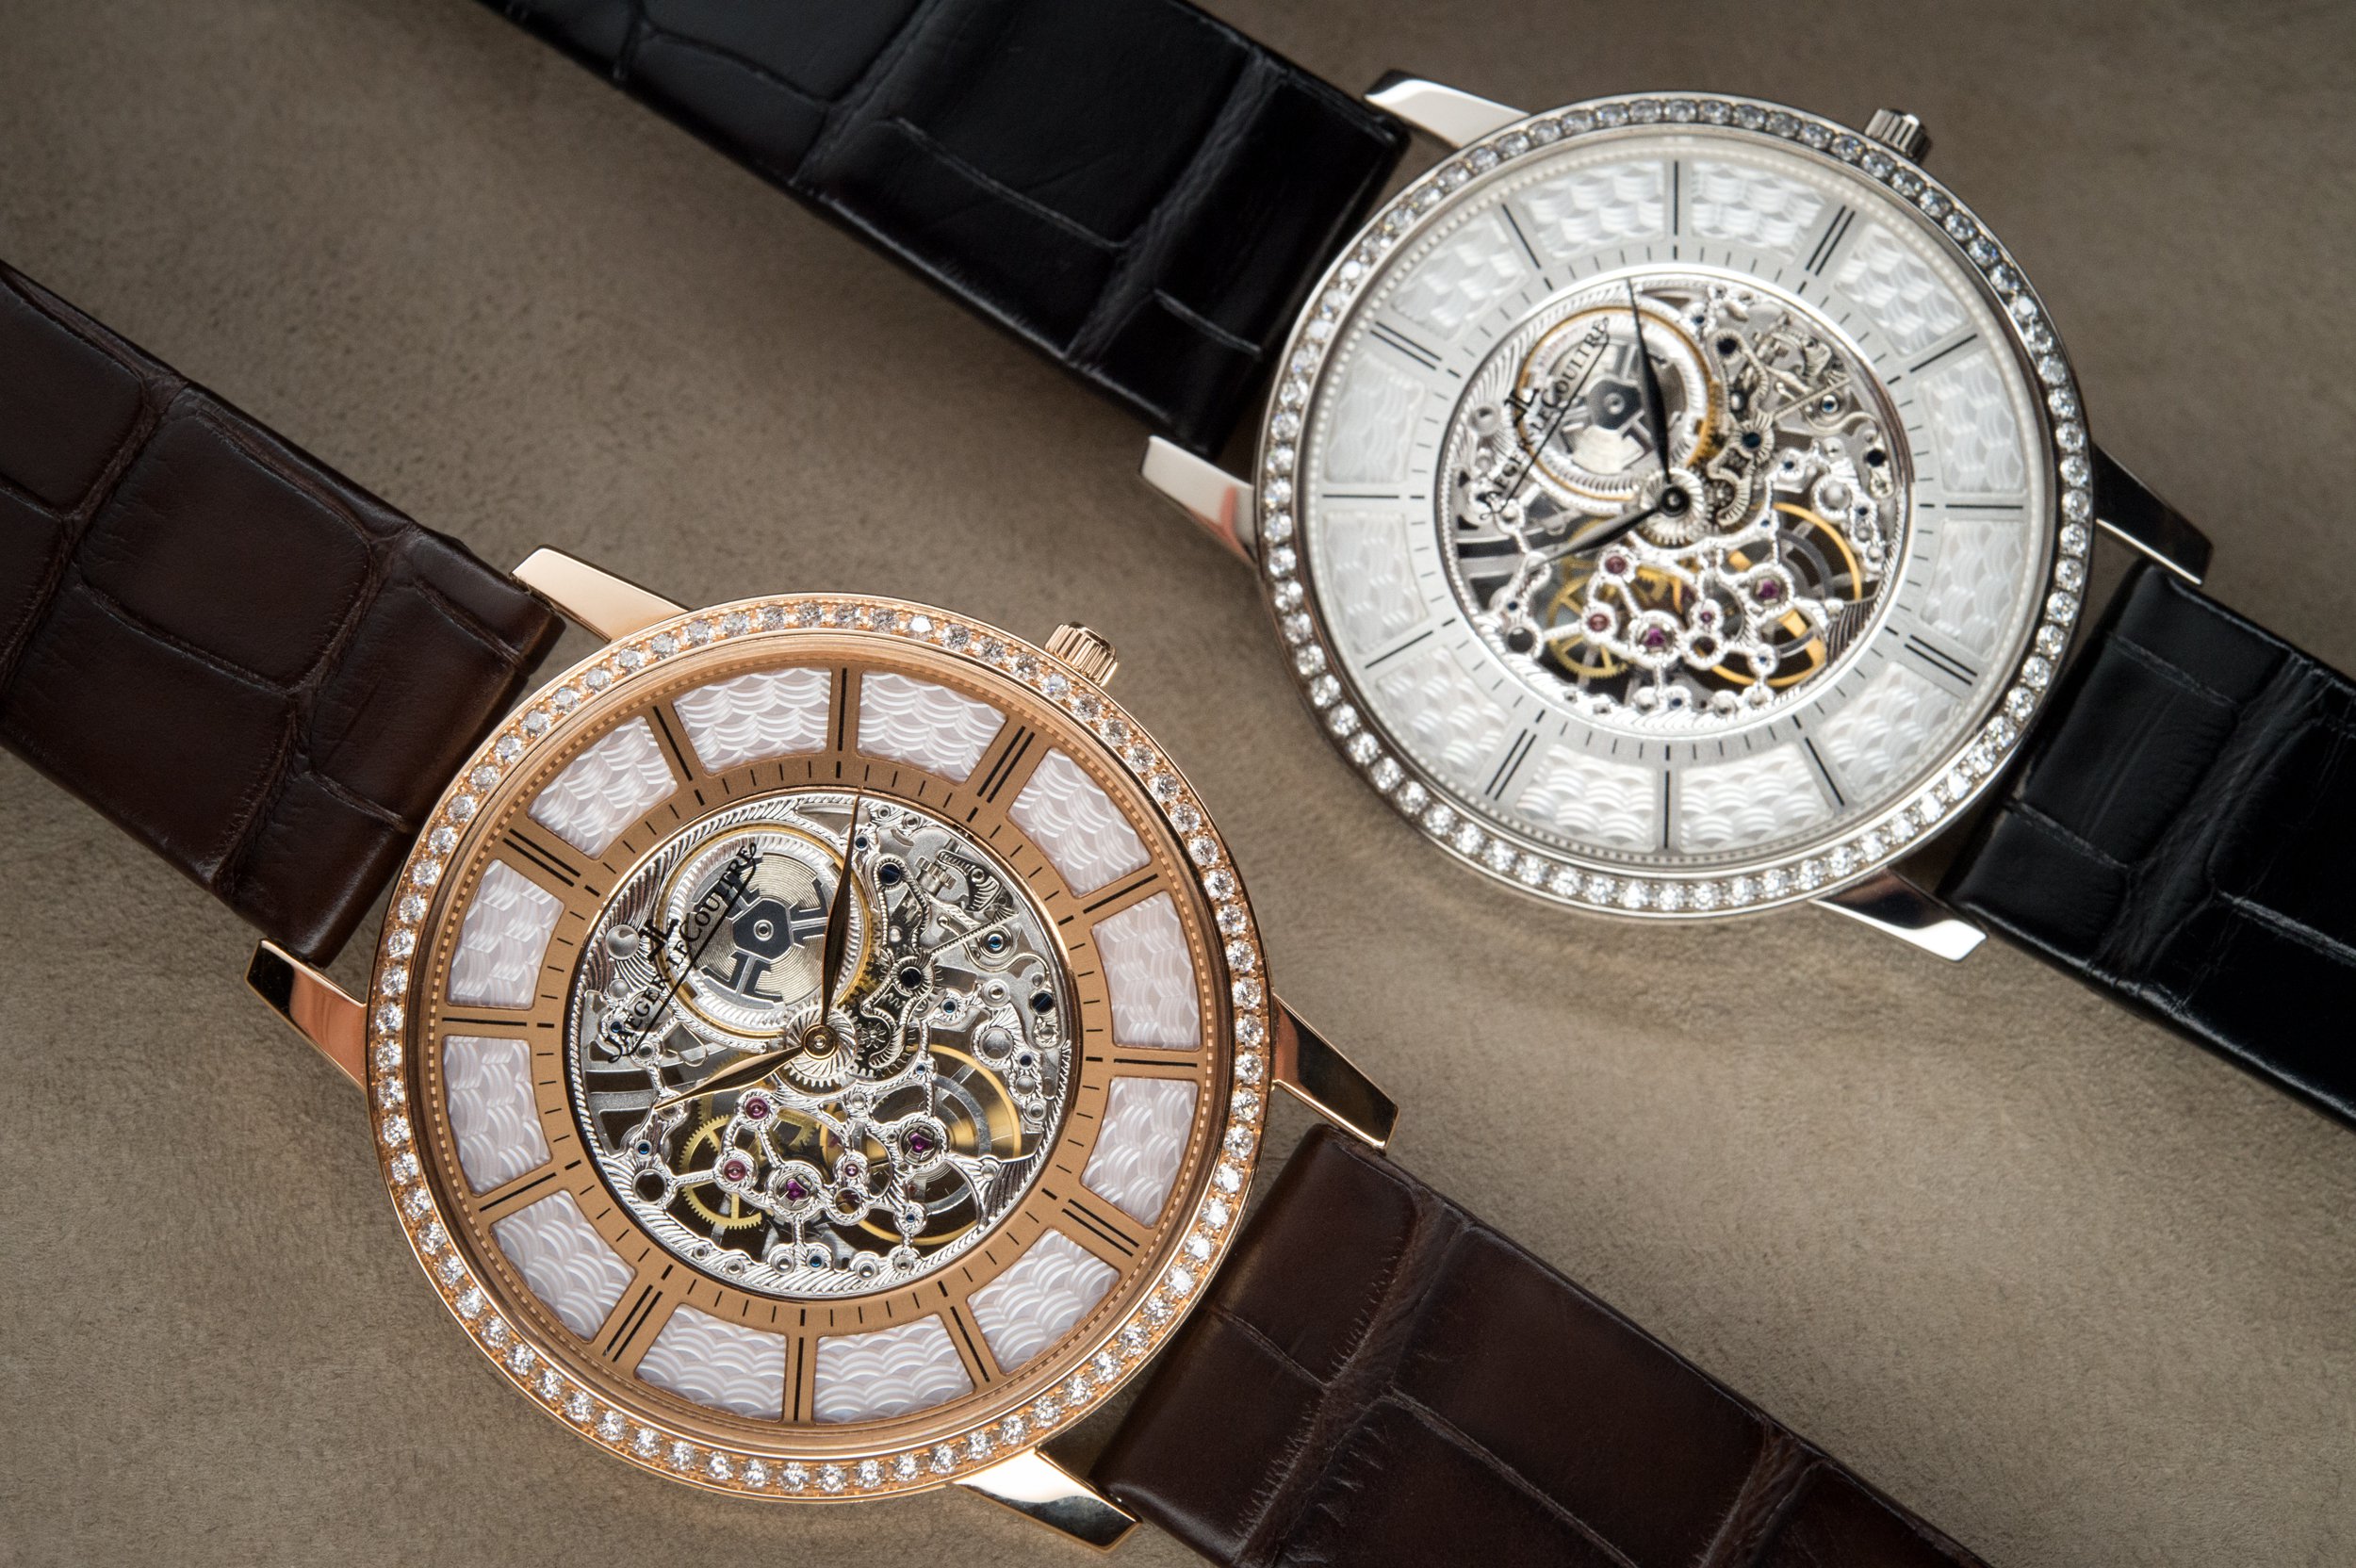 Jaeger-LeCoultre Master Ultra Thin Squelette Watch Collection 2015